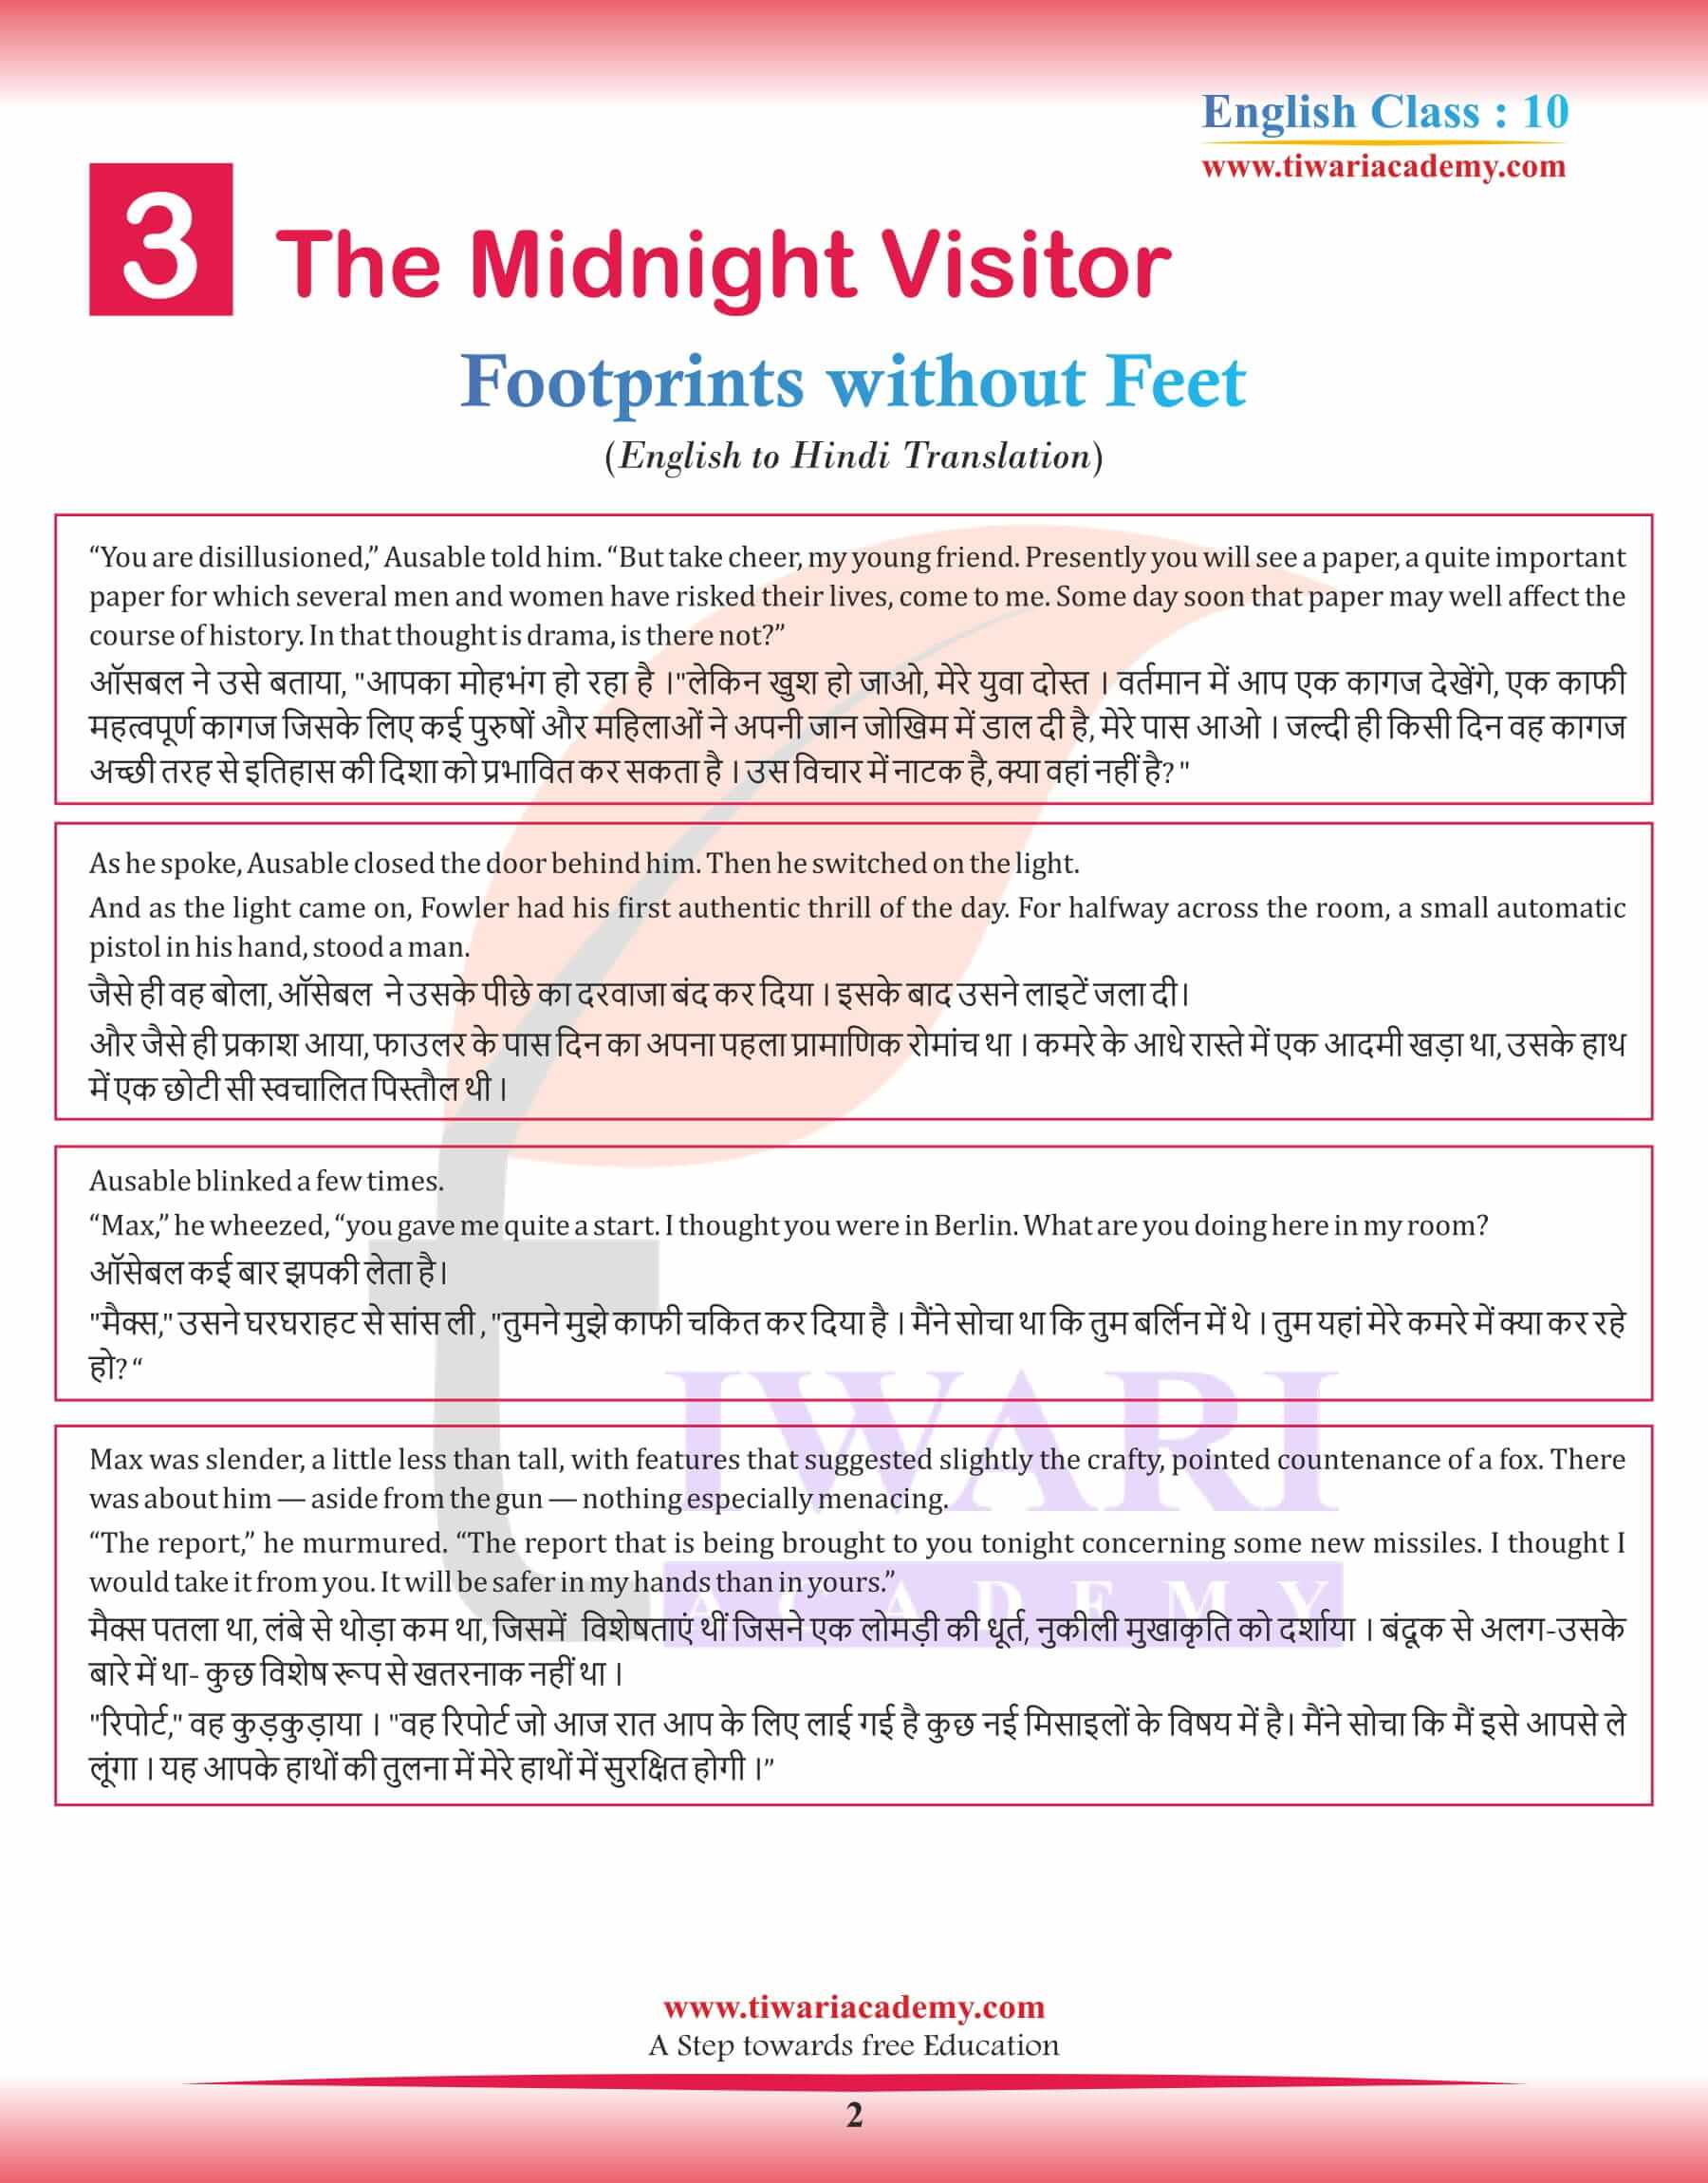 Class 10 English Supplementary Chapter 3 the Midnight Visitor